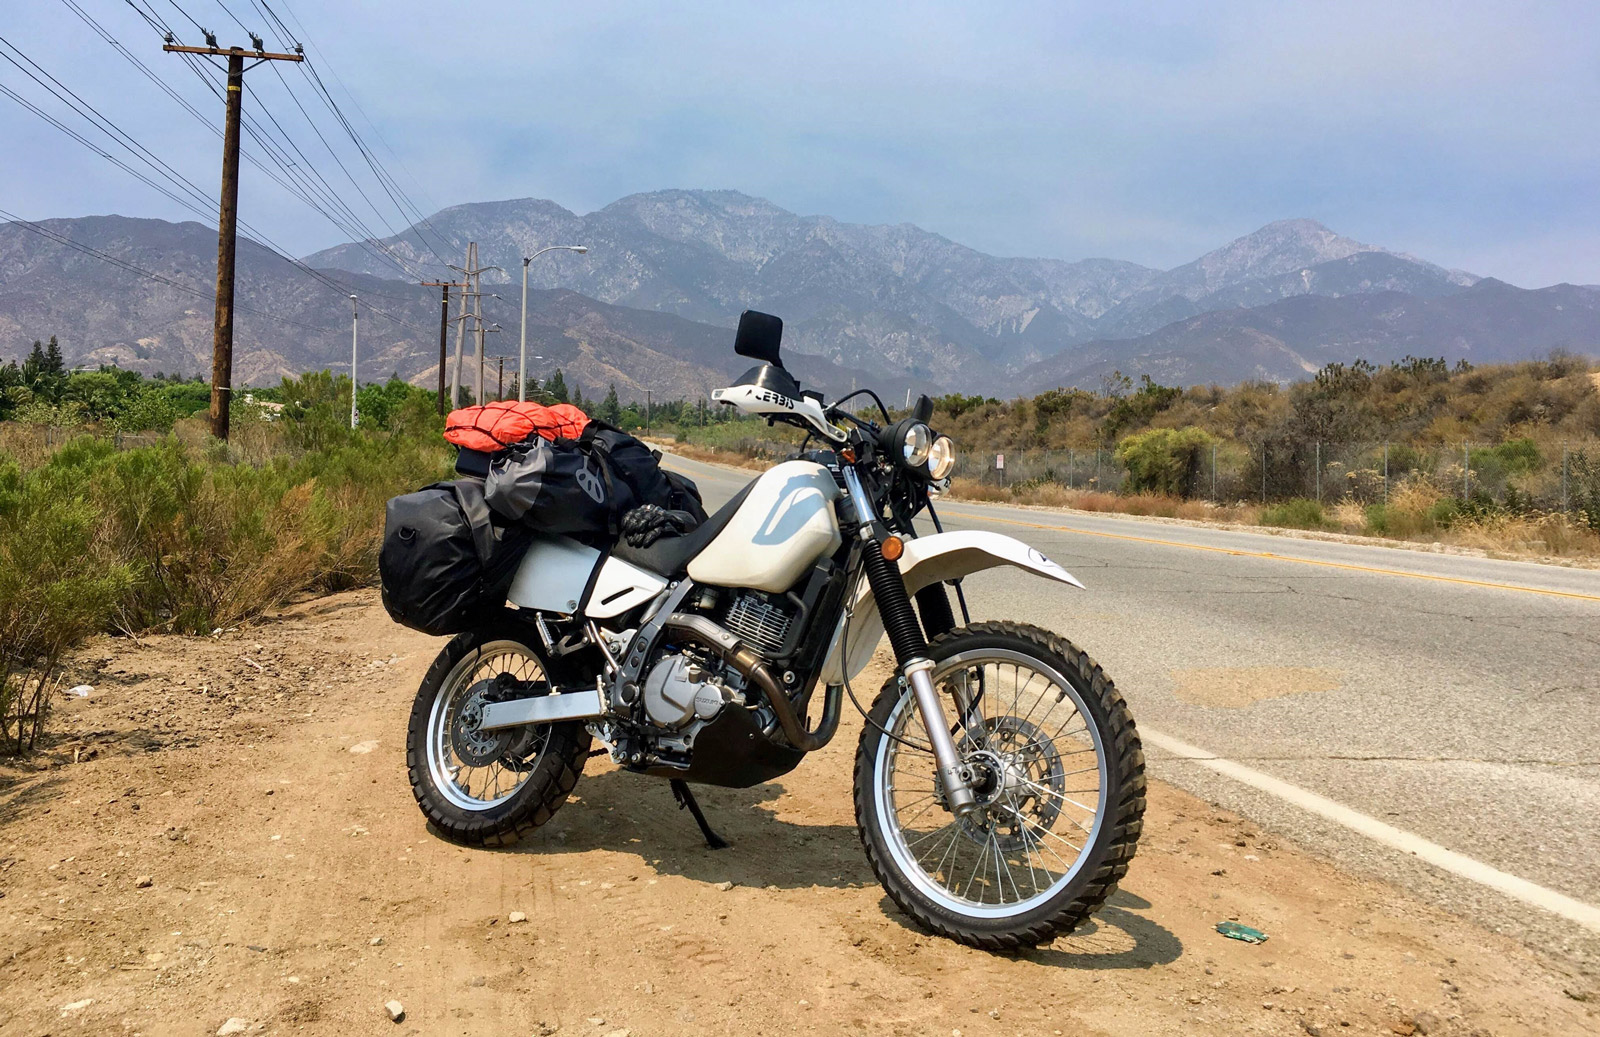 Dylan George Field's fully loaded Suzuki DR650 adventure bike parked in front of the San Gabriel mountains near Los Angeles, California, USA